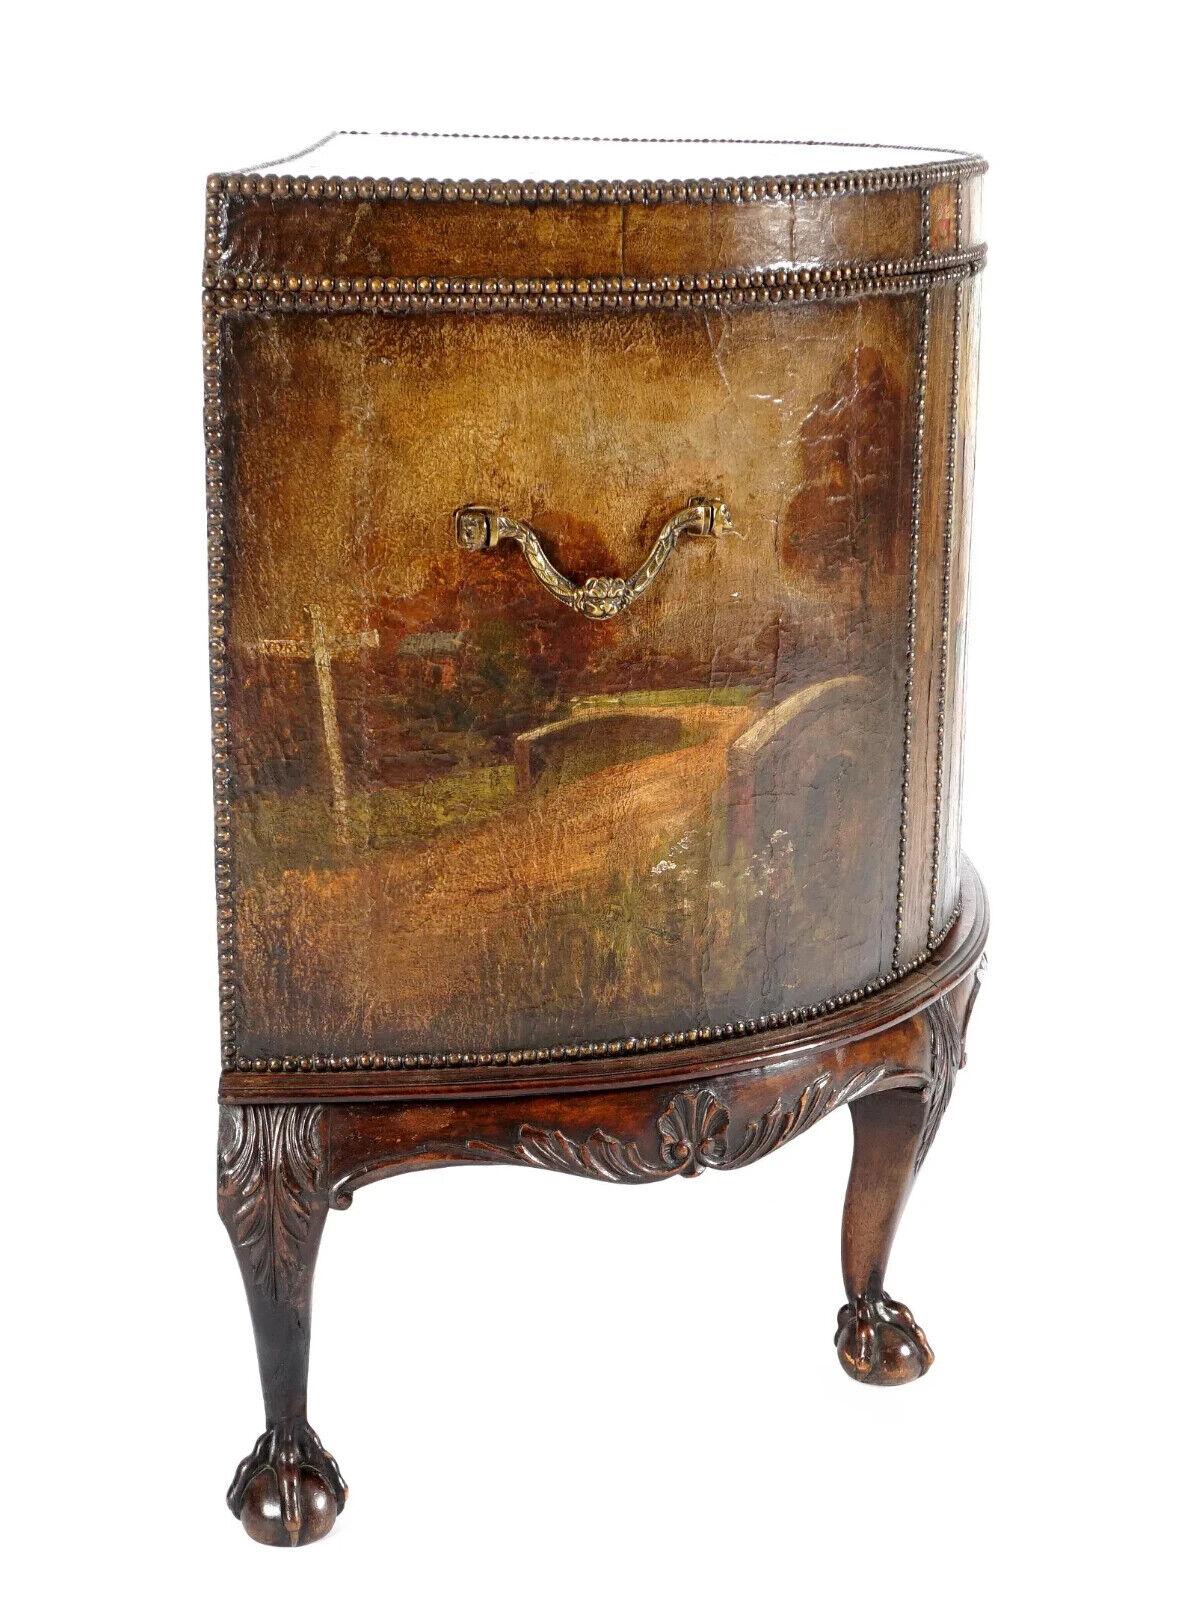 19th Century 1800s Antique Paint Decorated Scenes, Clad Leather, Brass Hand Demilune Chest! For Sale